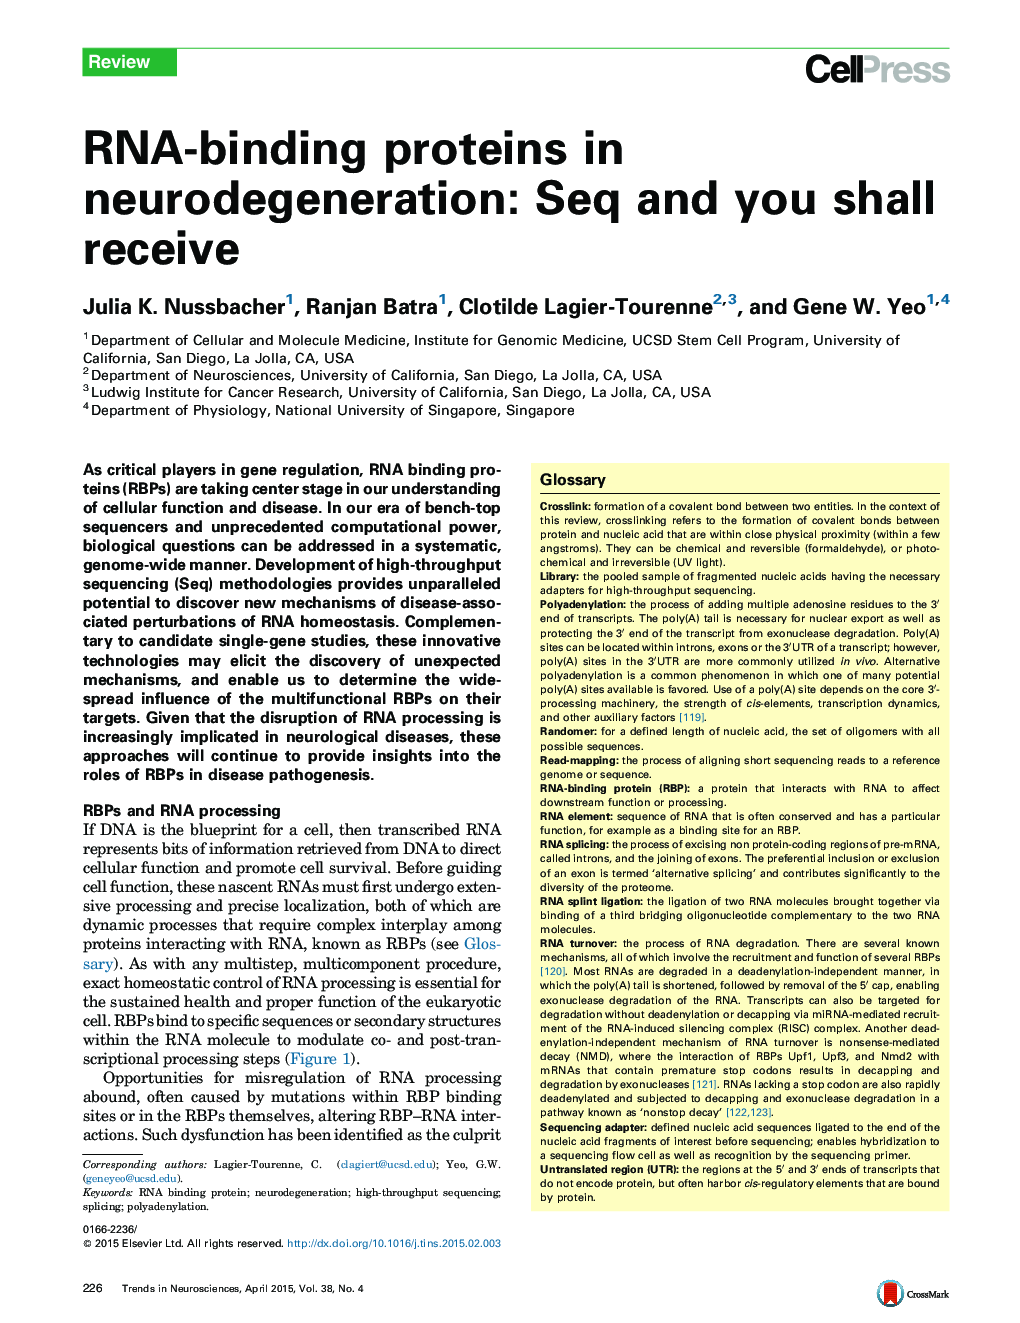 RNA-binding proteins in neurodegeneration: Seq and you shall receive